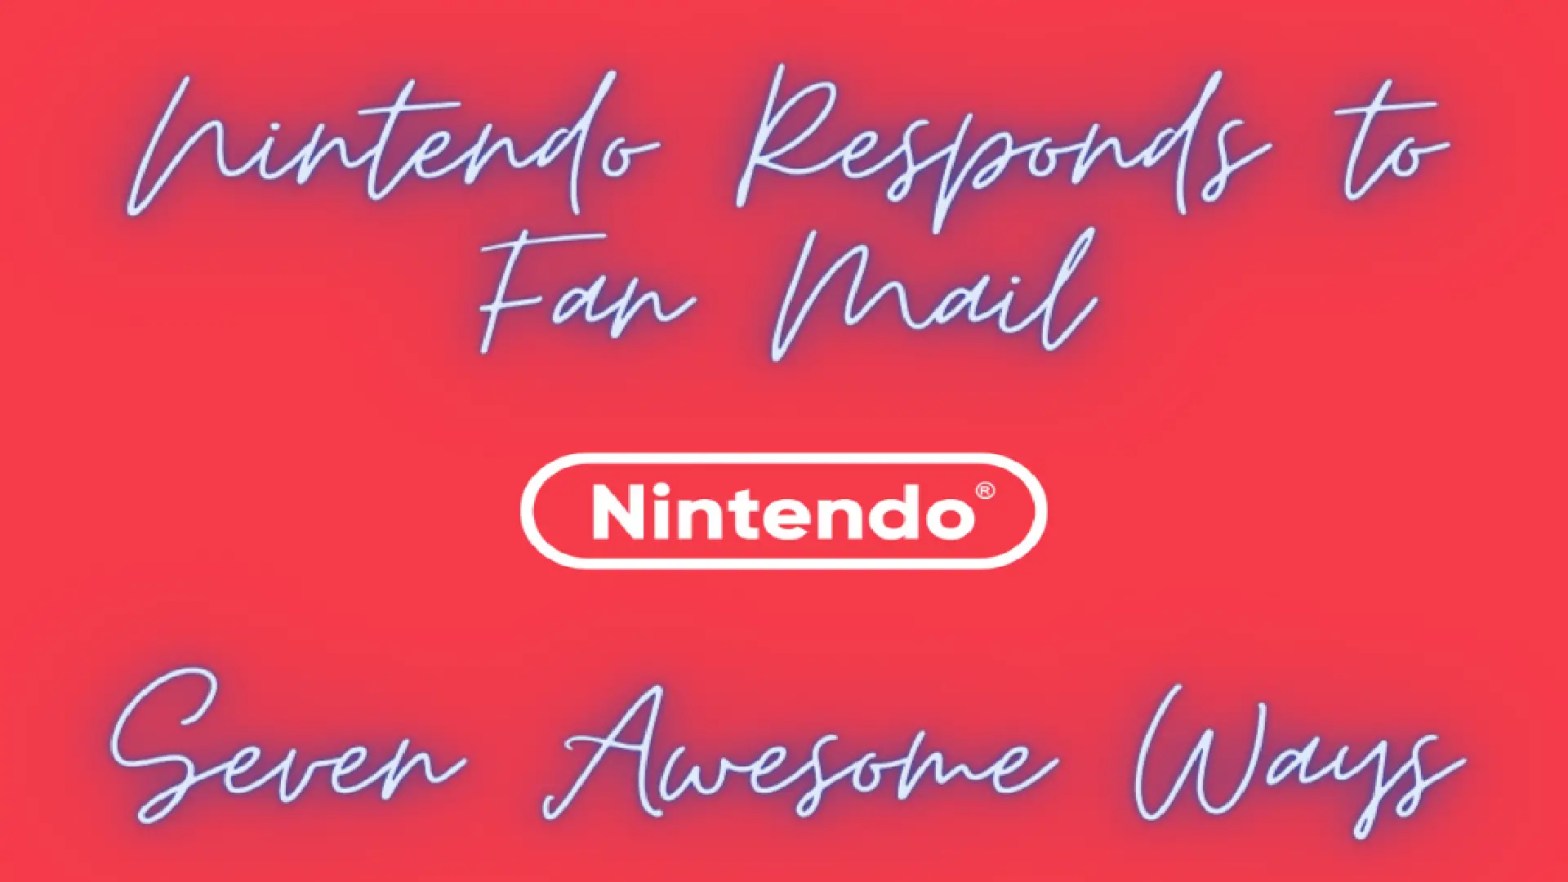 Seven Times When Nintendo Responded to Fan Mail in Awesome Ways